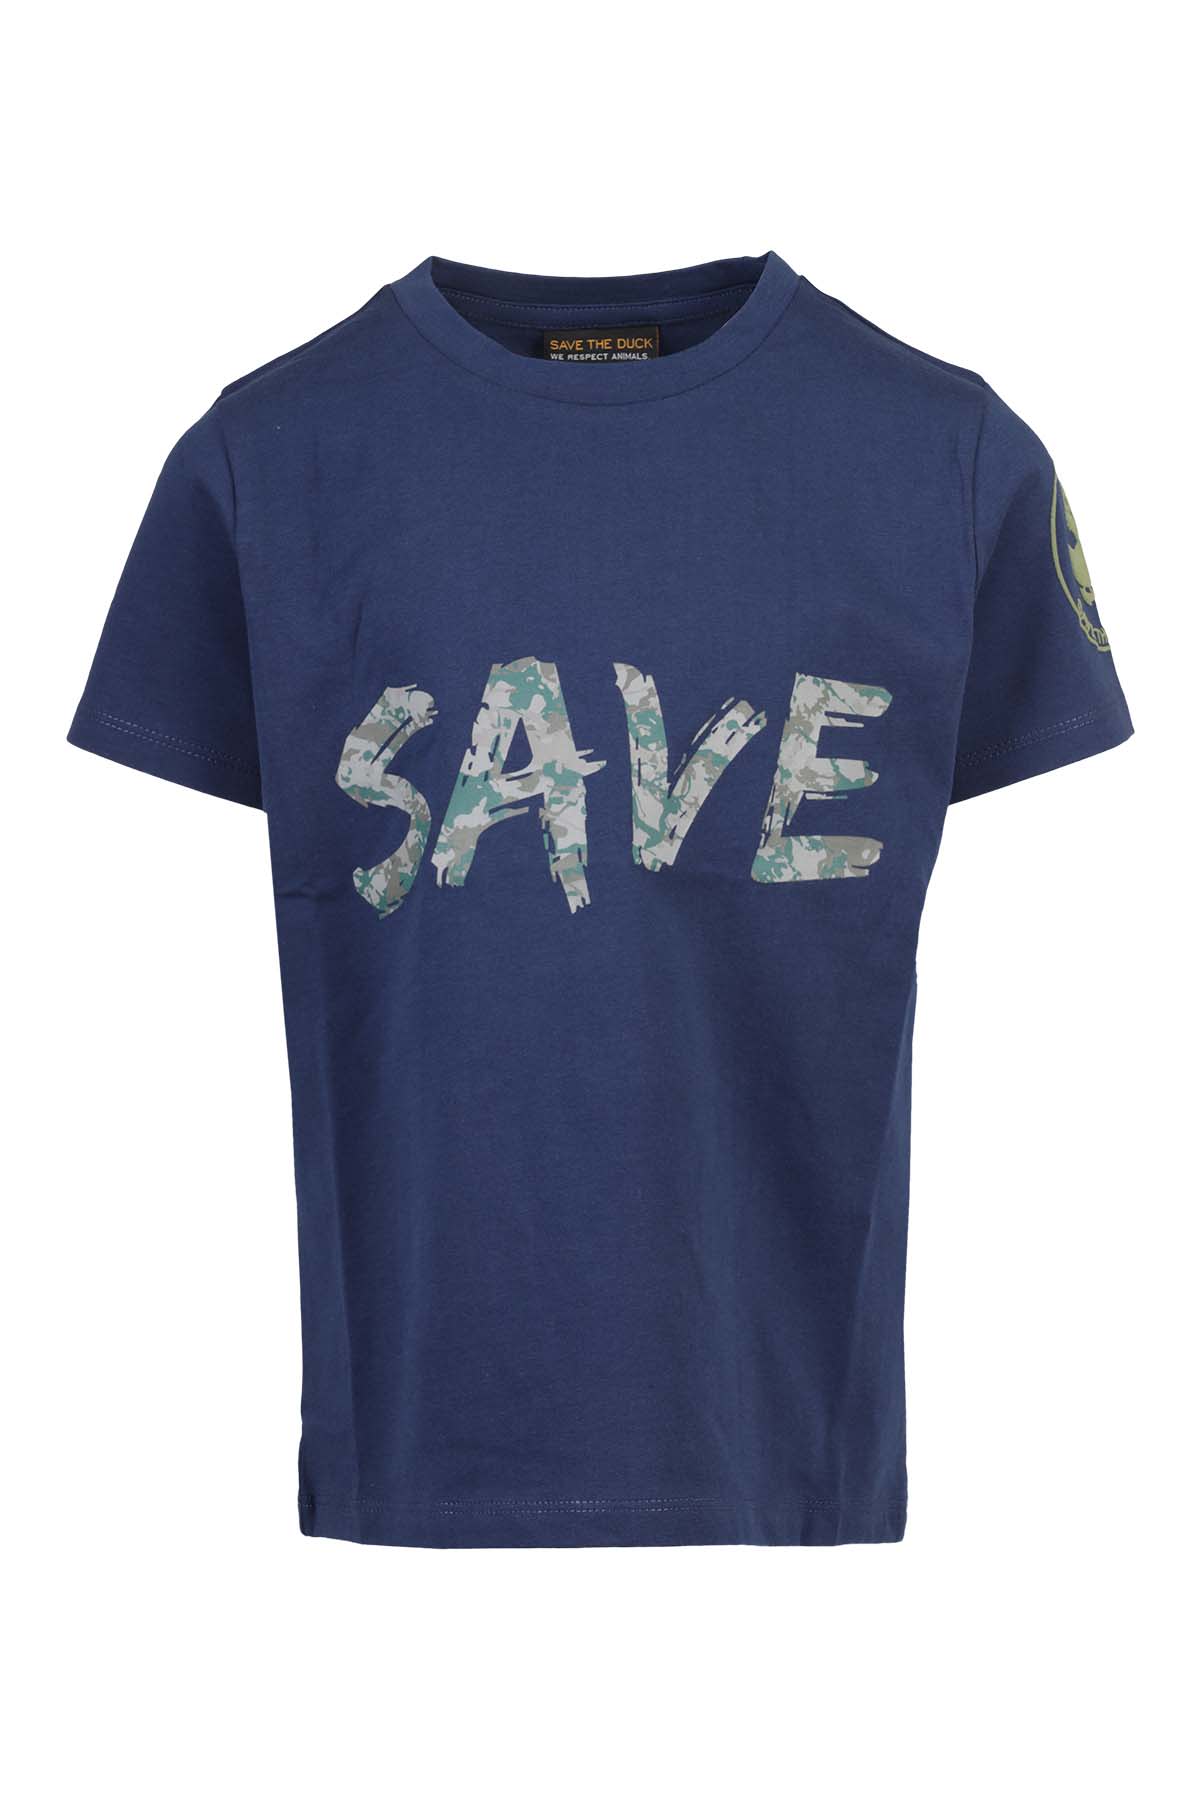 Save the Duck T-Shirt